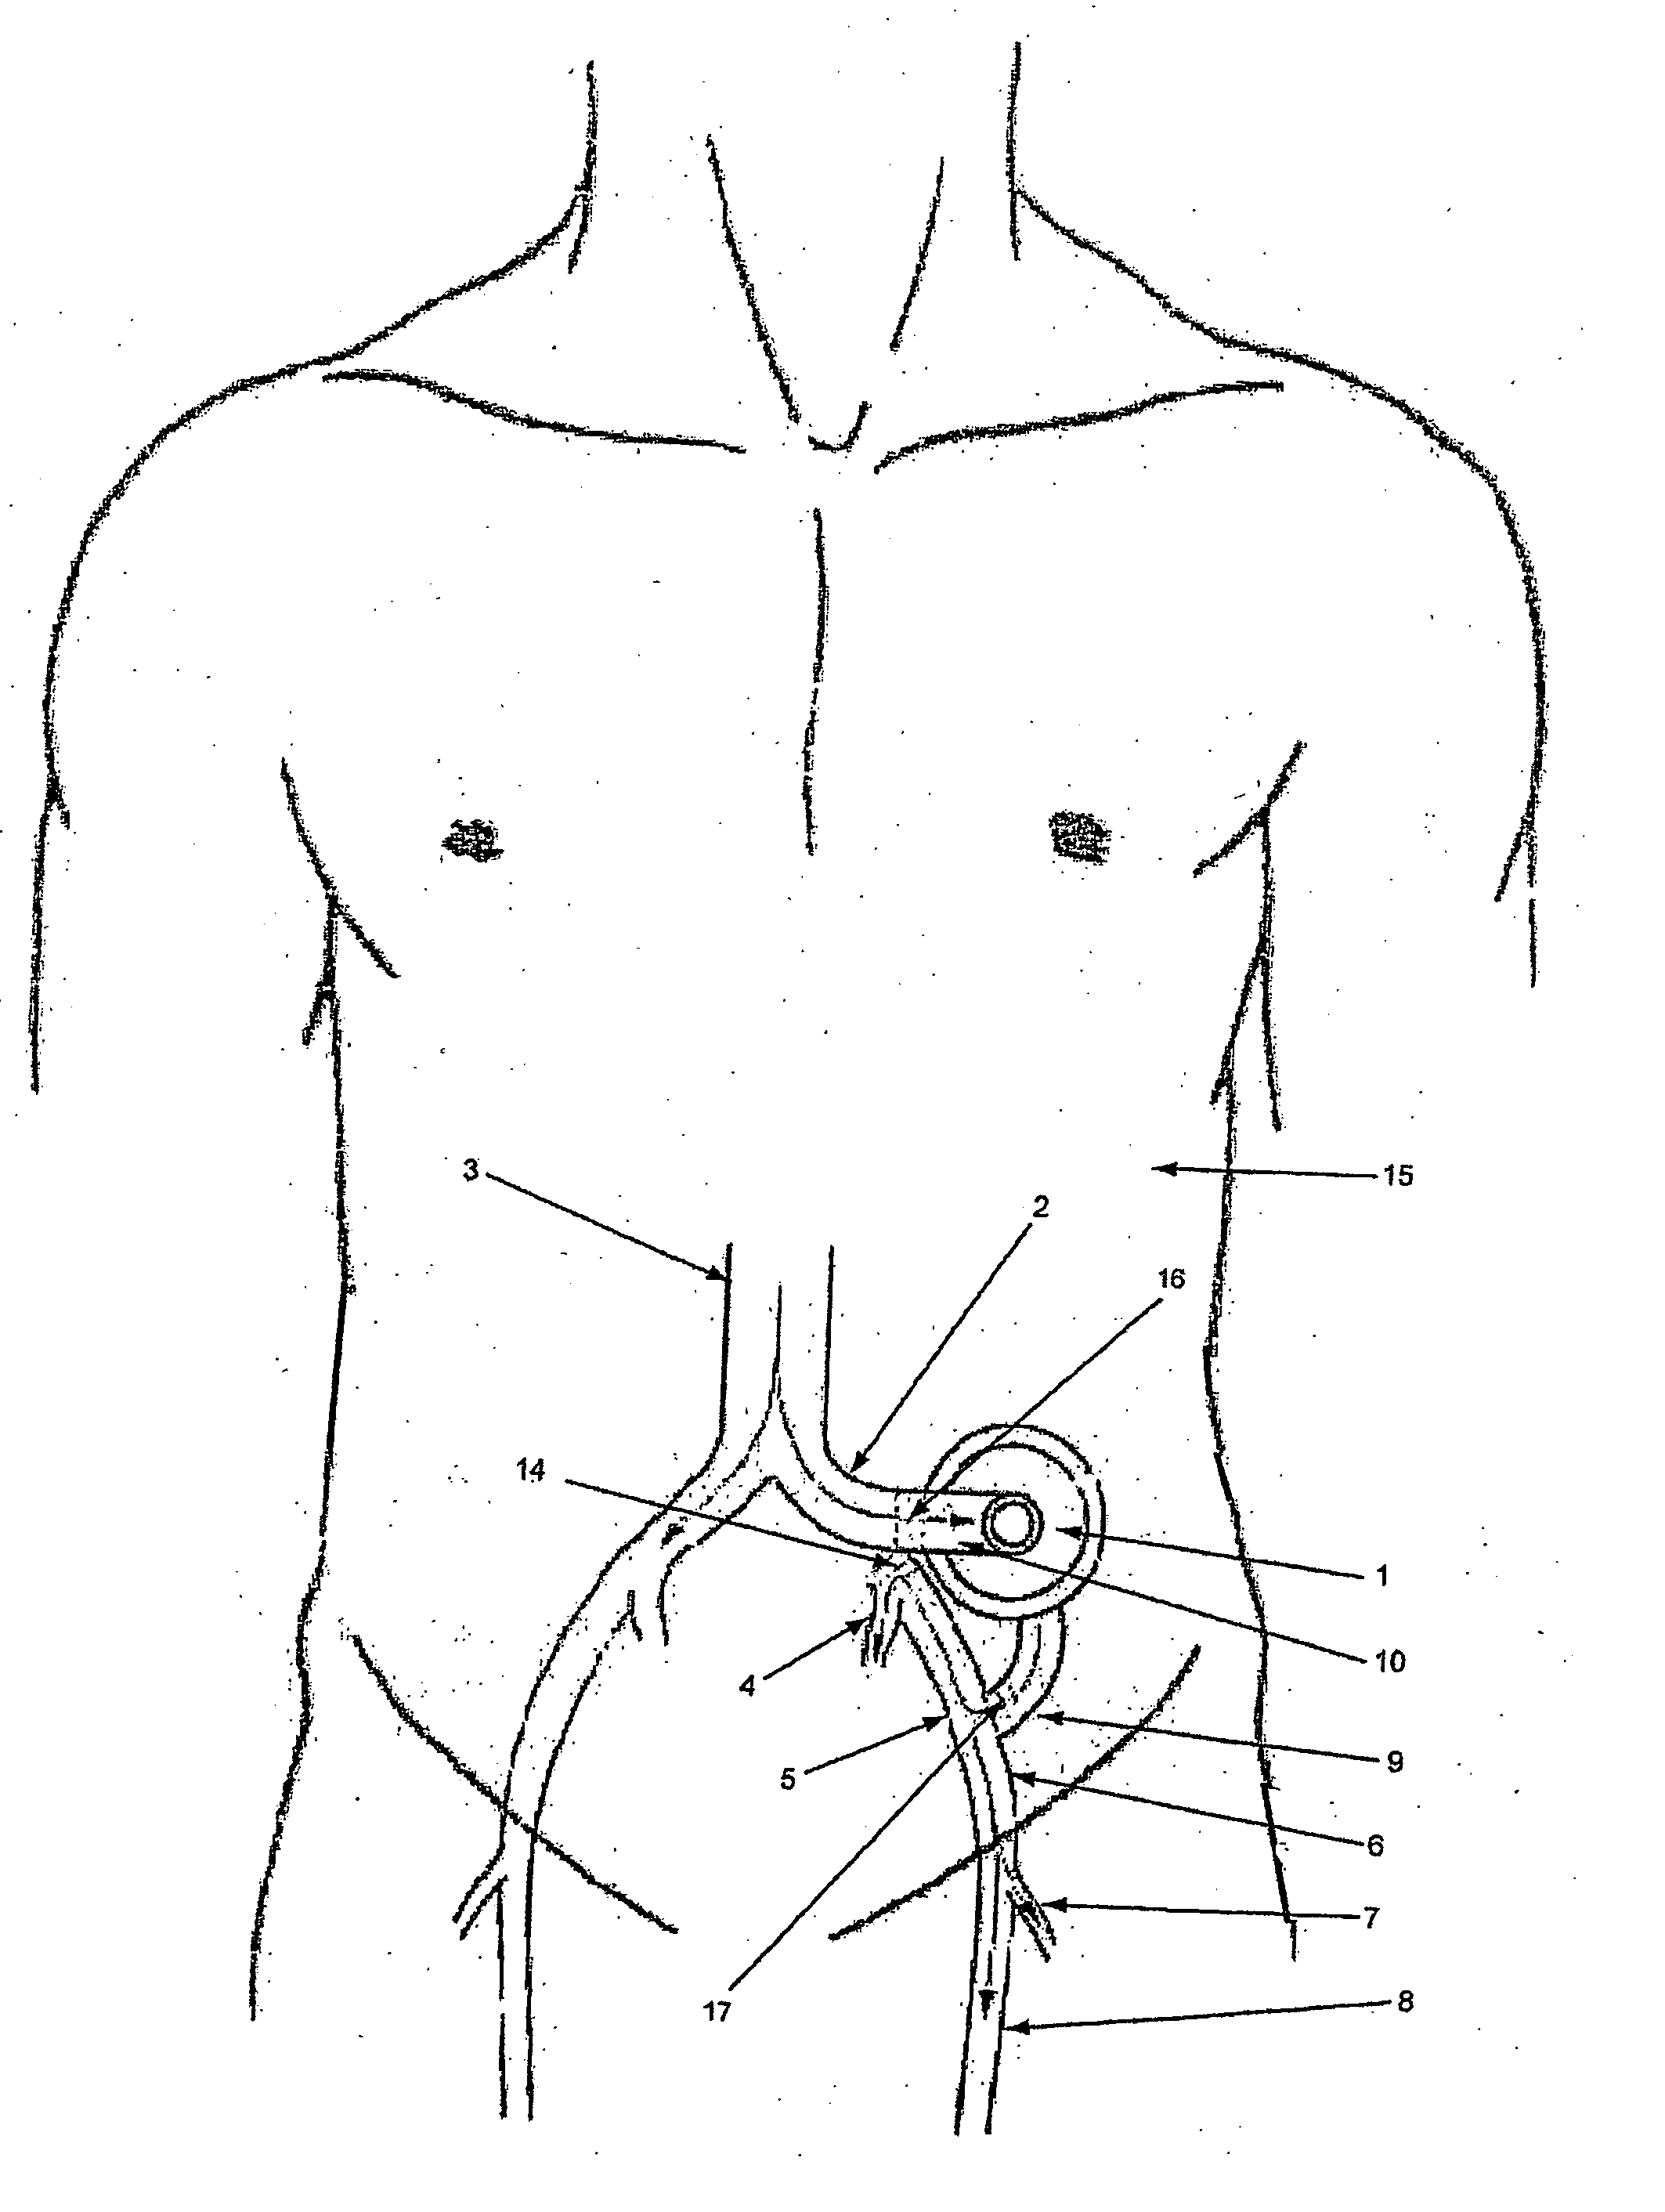 Blood pumping system and procedure